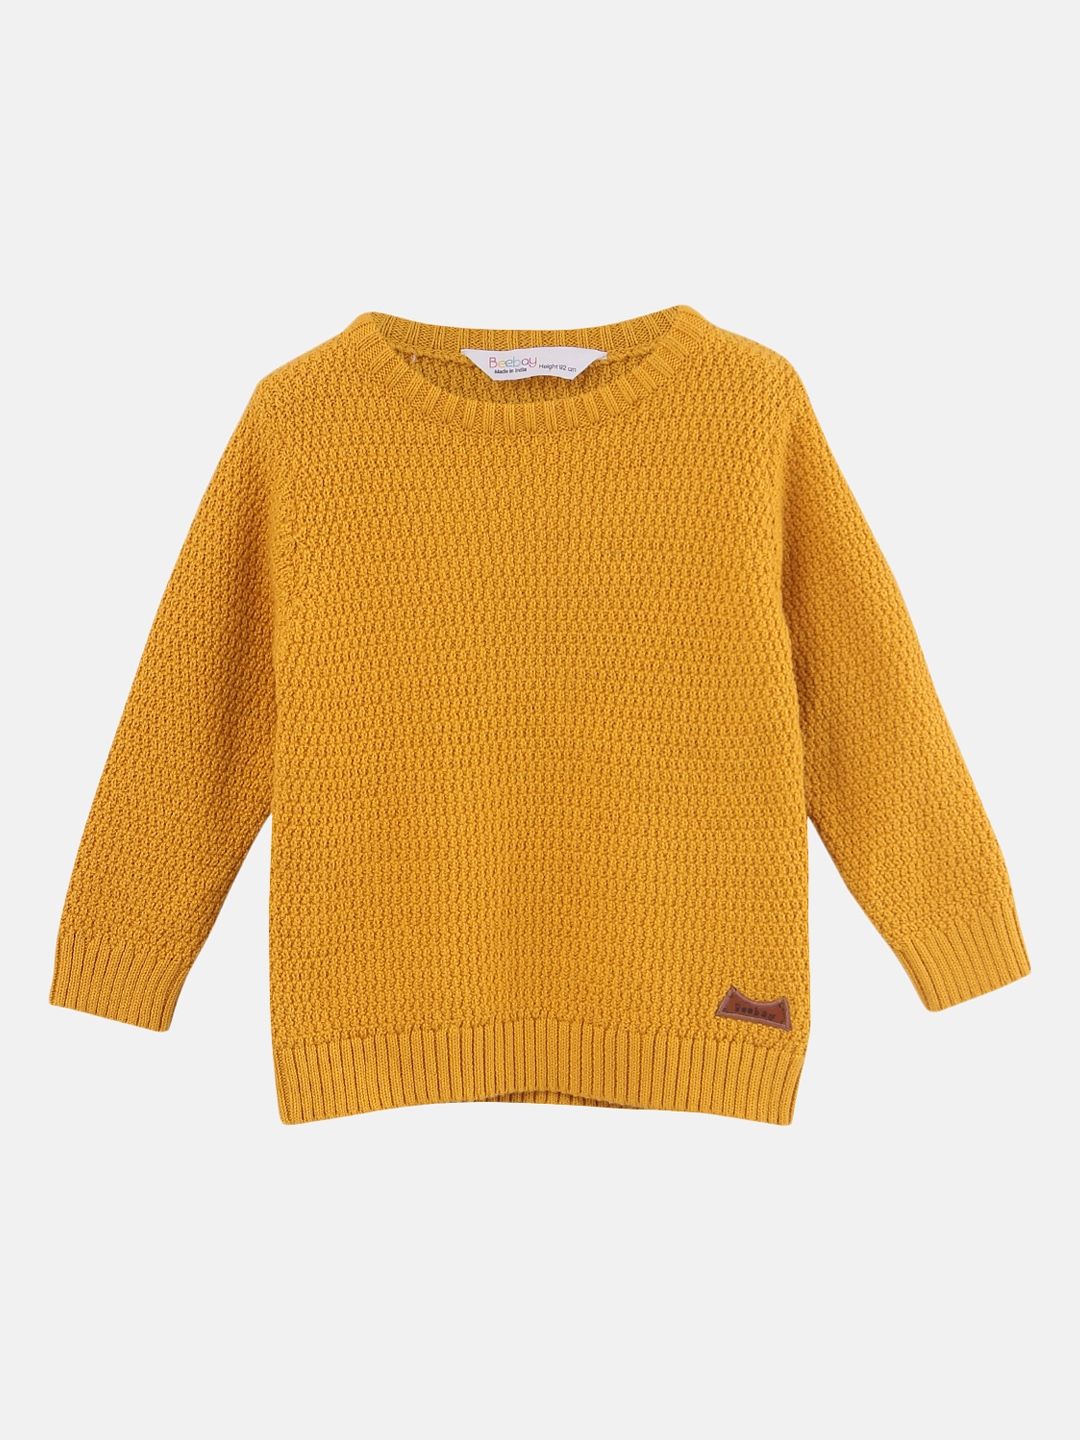 Buy Beebay Boys Yellow Self Design Knitted Pullover Sweater - Sweaters ...